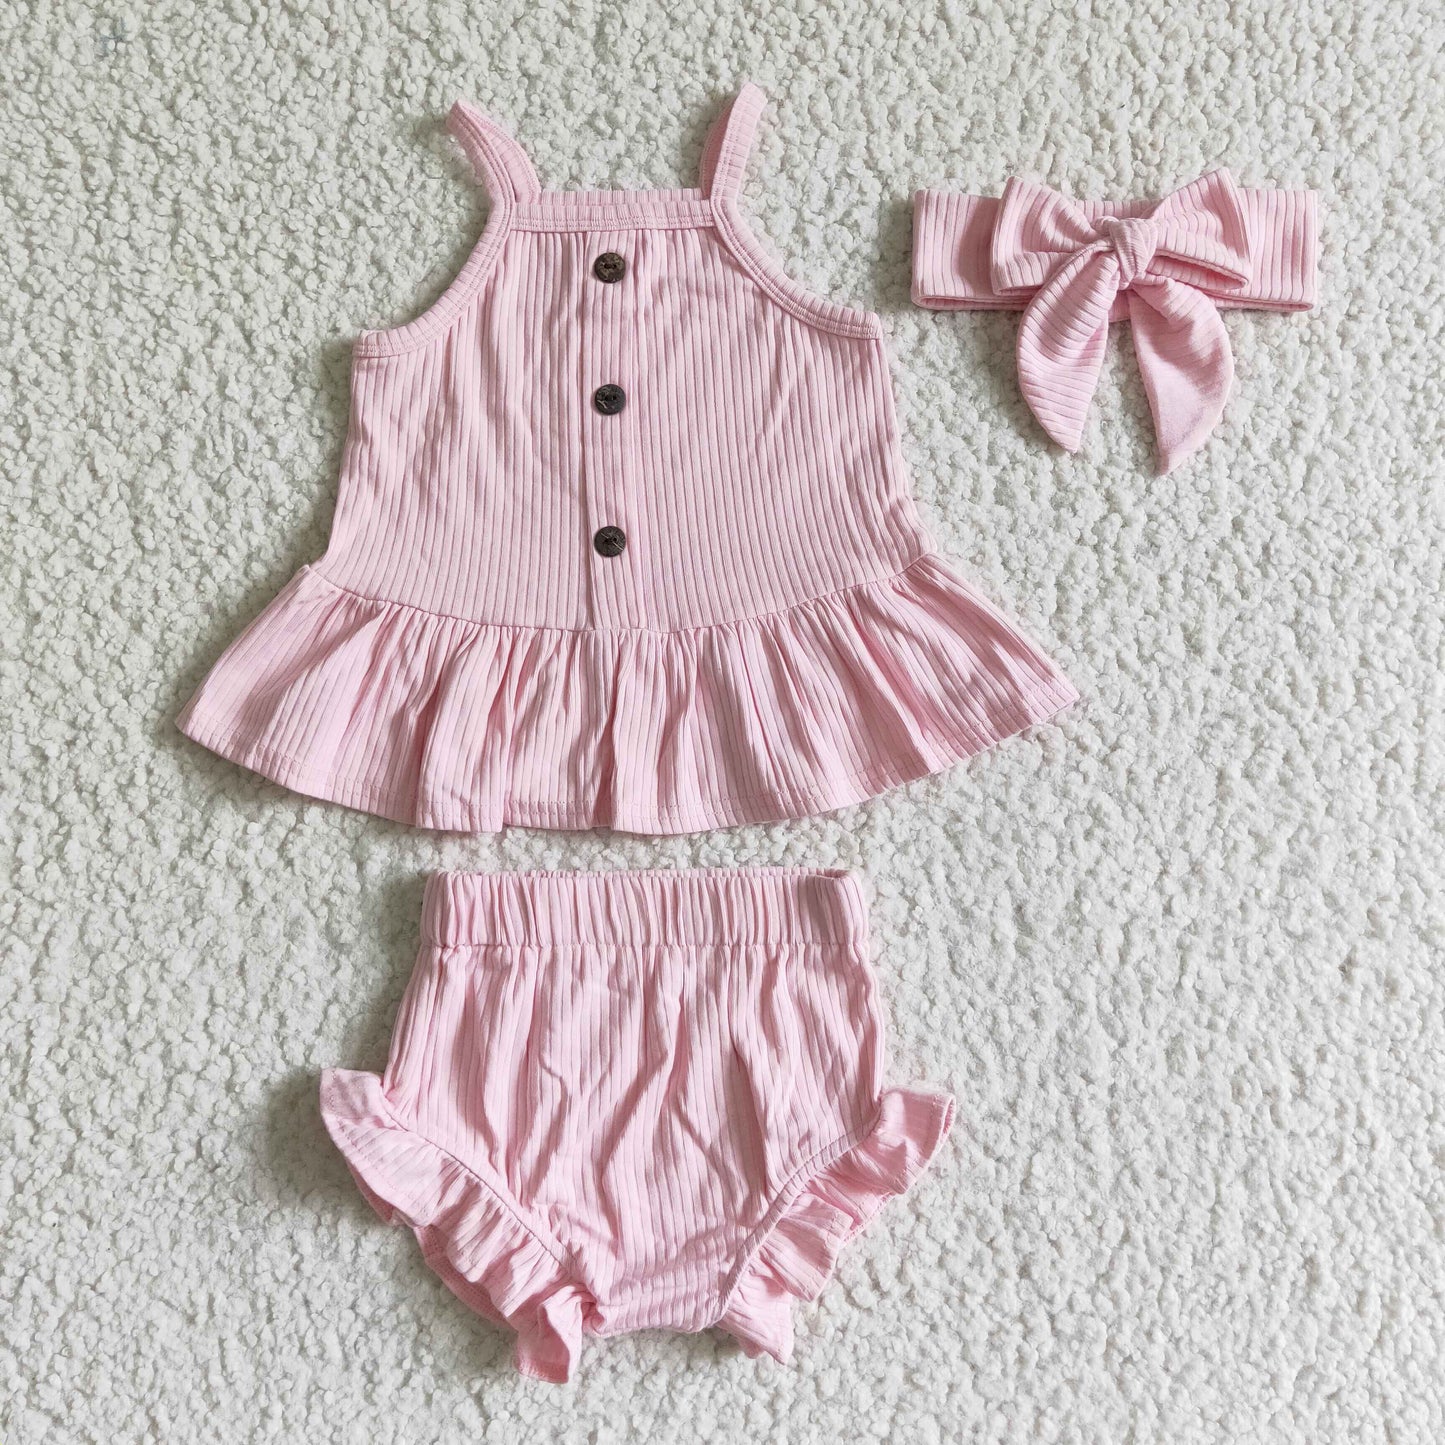 Girls summer cotton bummie outfits       GBO0054